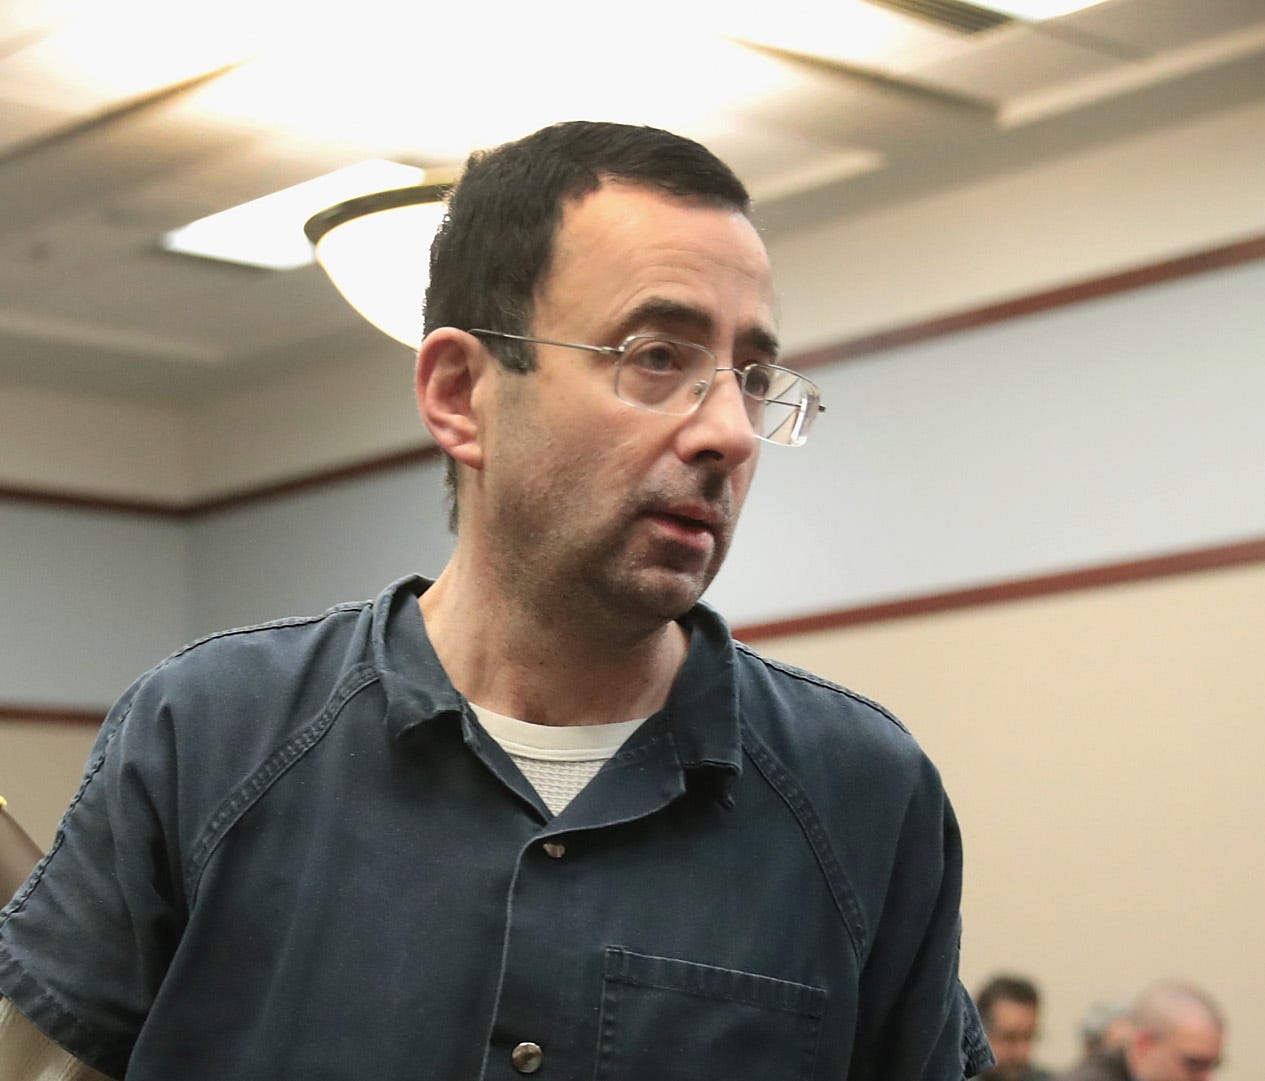 LANSING, MI - JANUARY 17:  Larry Nassar appears in court to listen to victim impact statements during his sentencing hearing after being accused of molesting more than 100 girls while he was a physician for USA Gymnastics and Michigan State Universit